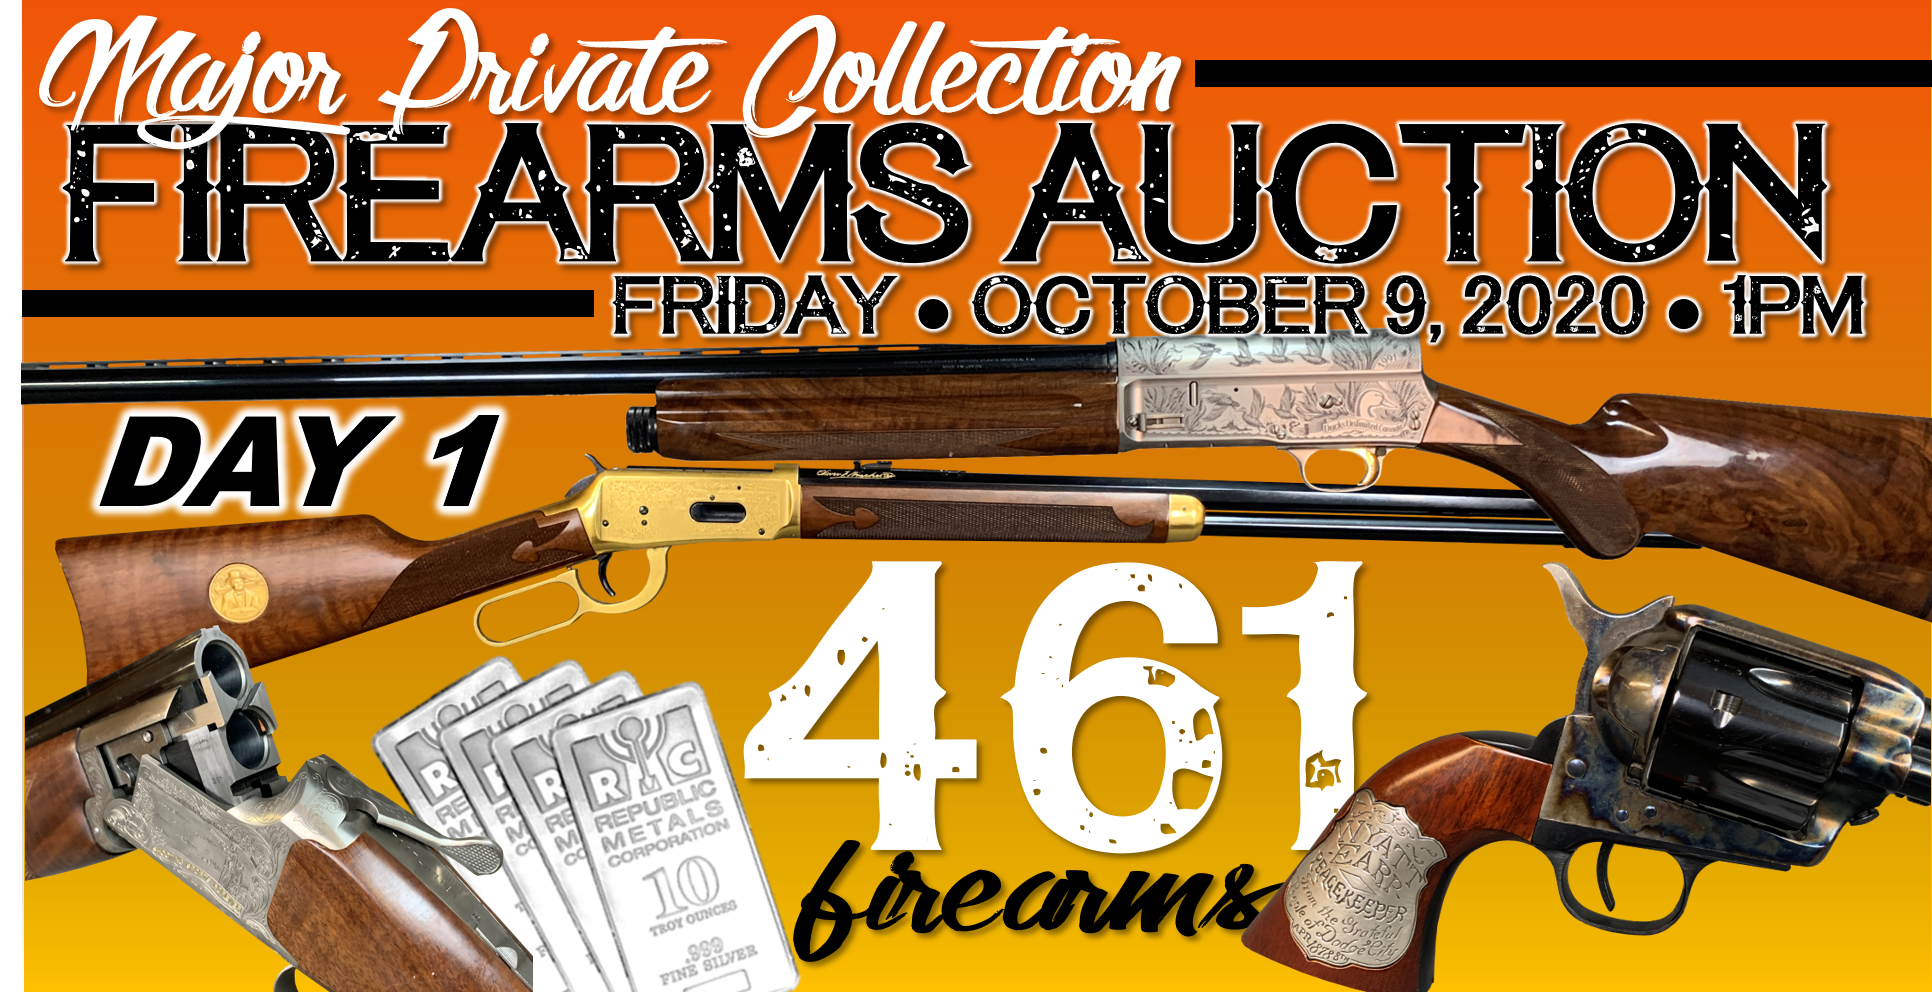 MAJOR PRIVATE COLLECTION FIREARMS AUCTION – DAY 1